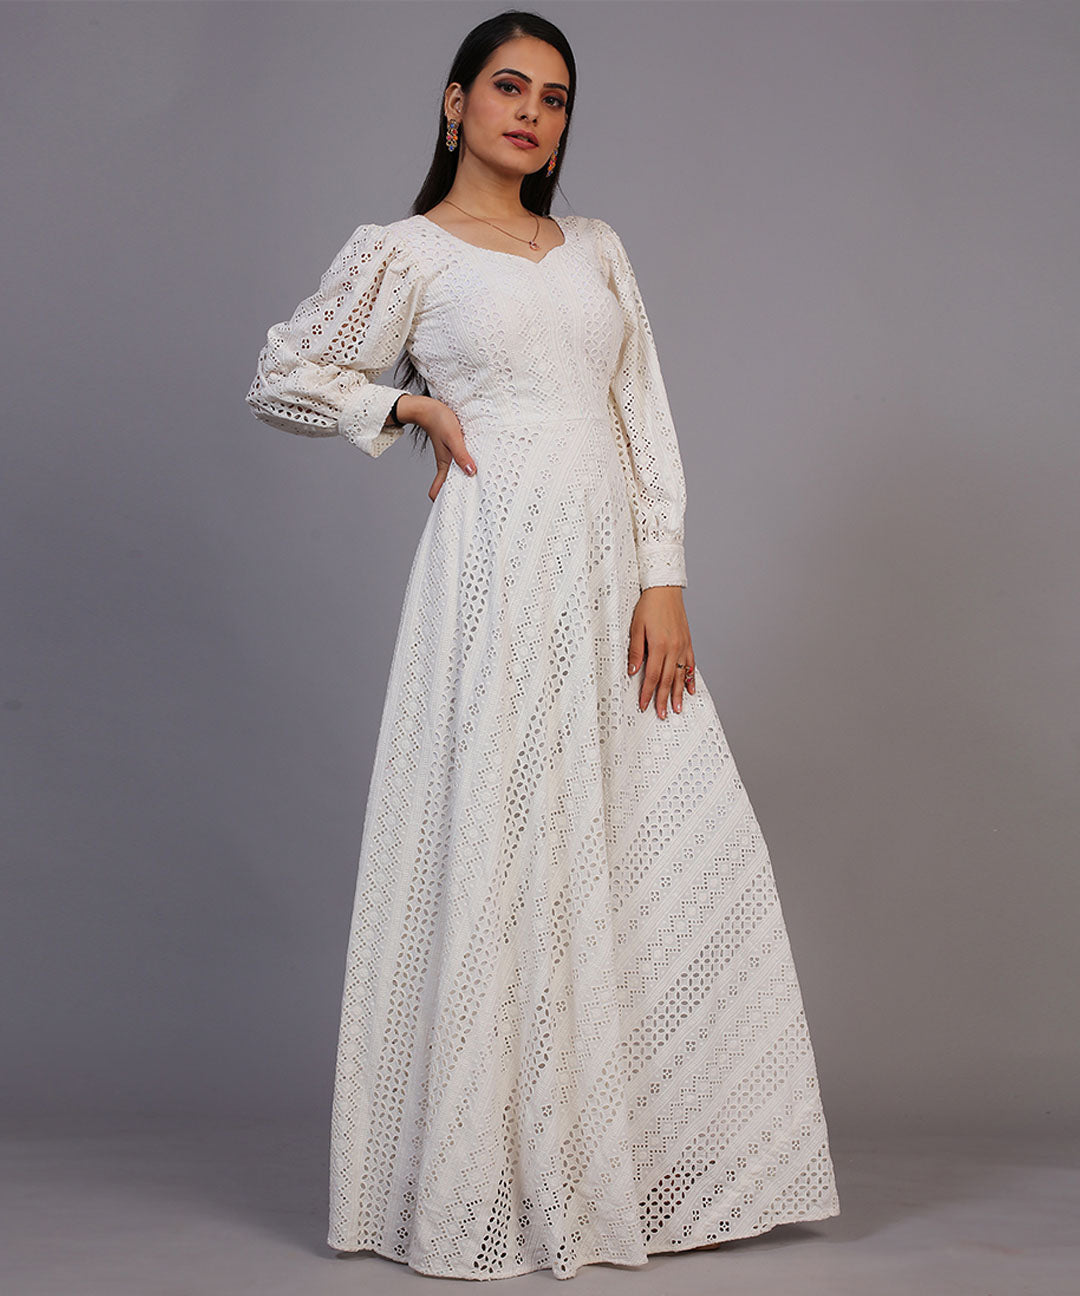 Classic off-white Lucknowi embroidered floor-length gown, showcasing timeless elegance and craftsmanship.